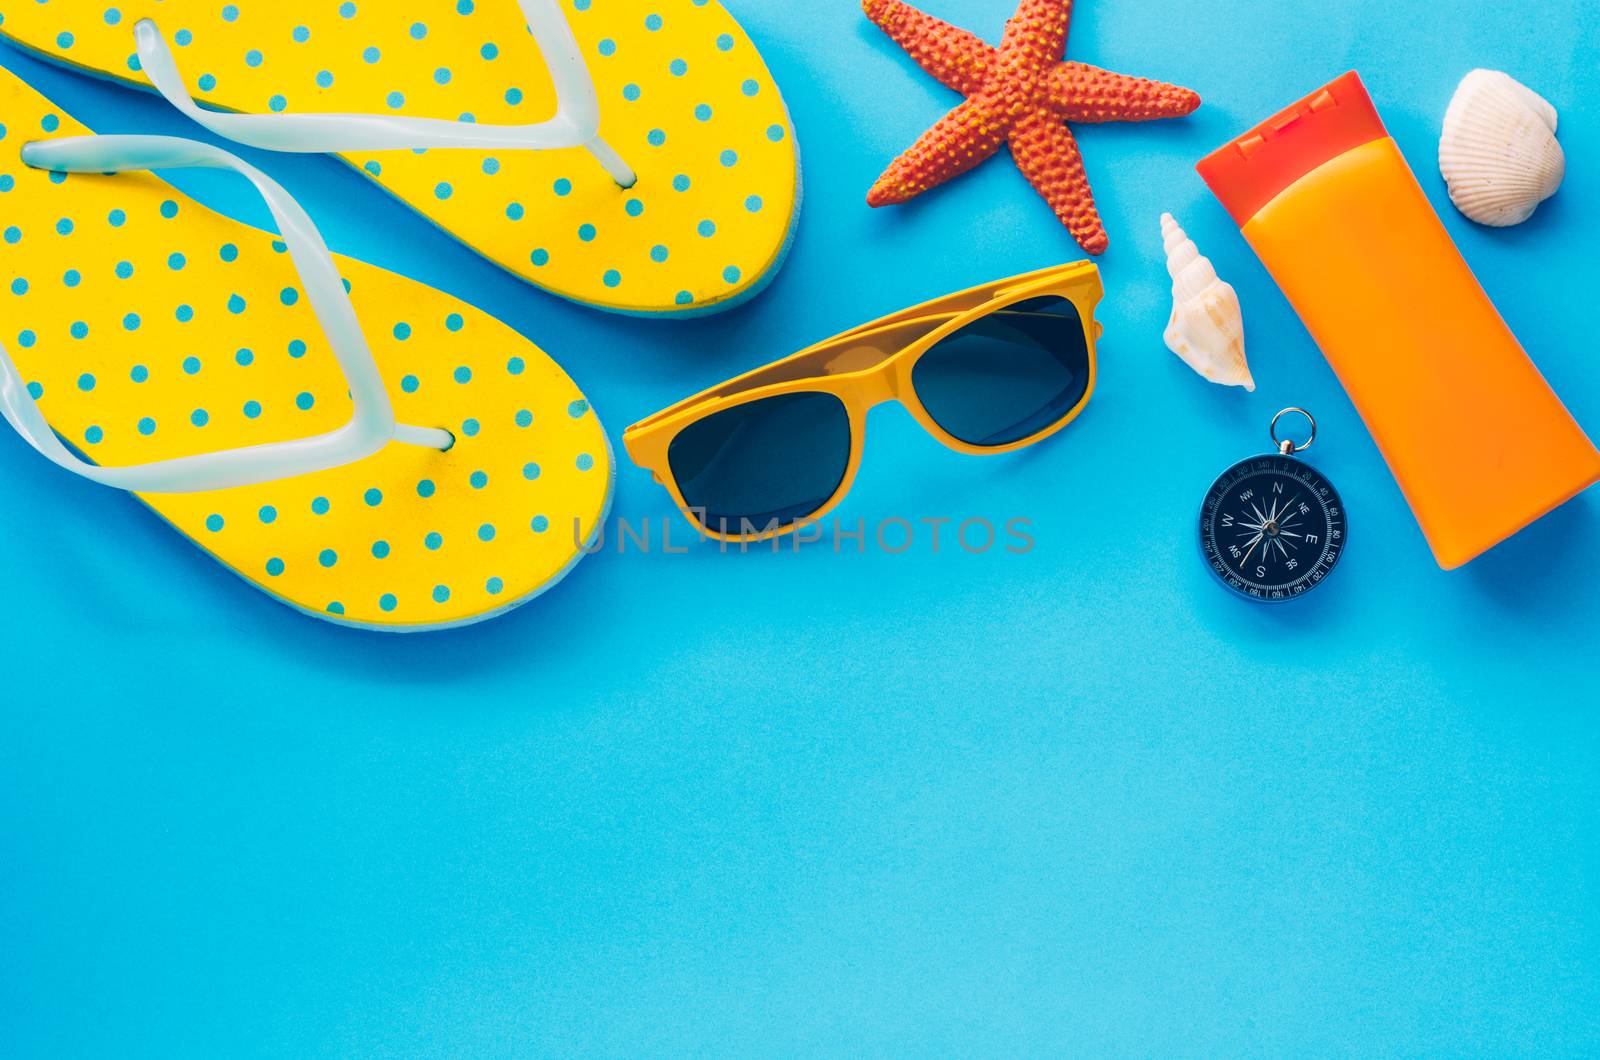 Clothing accessories for summer on blue paper floor - concept lifestyle
